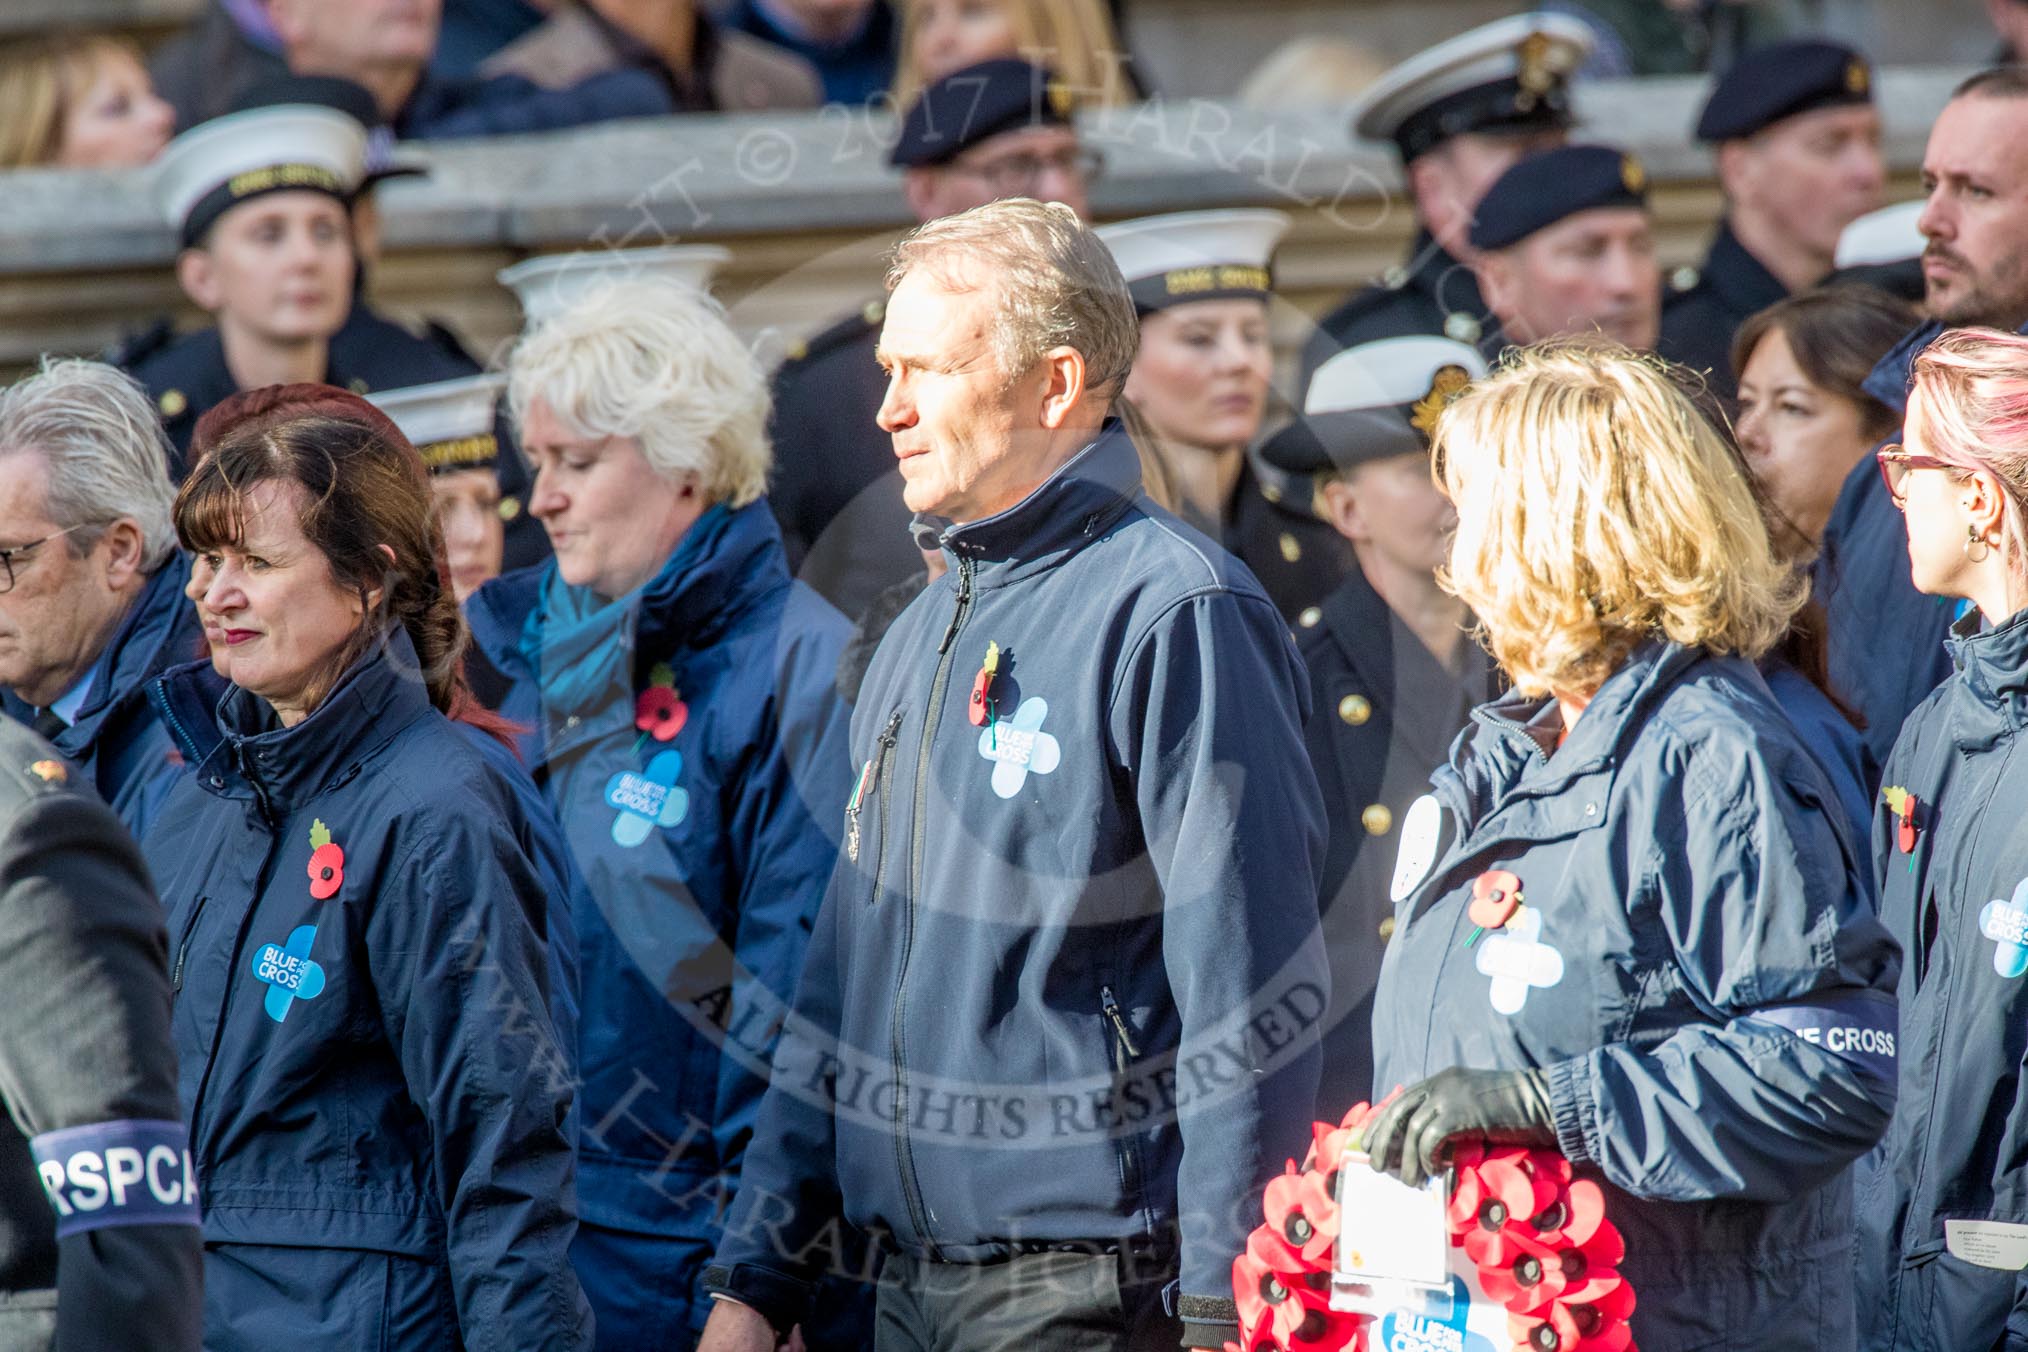 Blue Cross (Group M20, 18 members) during the Royal British Legion March Past on Remembrance Sunday at the Cenotaph, Whitehall, Westminster, London, 11 November 2018, 12:27.